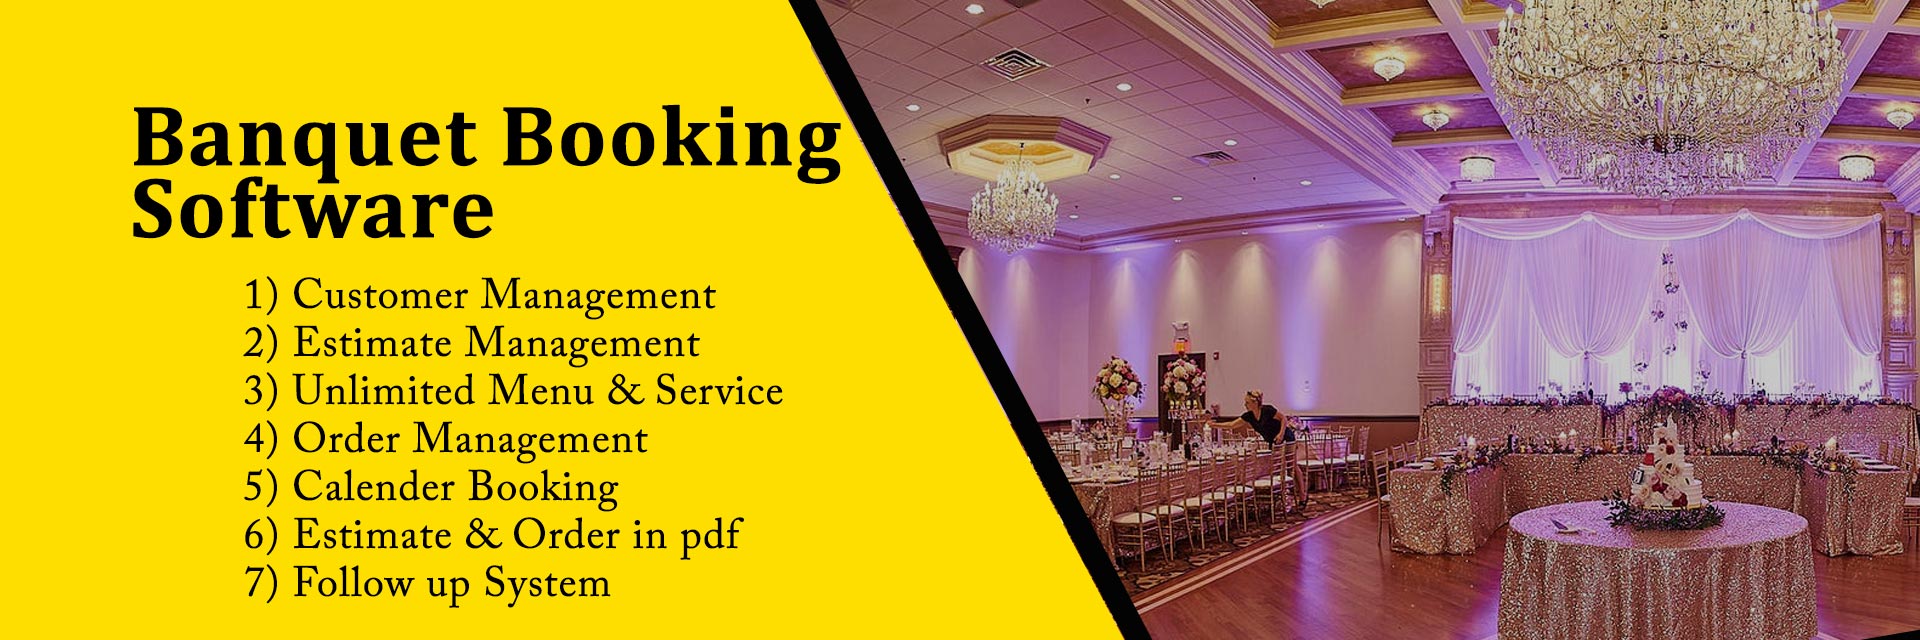 Banquet Booking Software in Nagpur